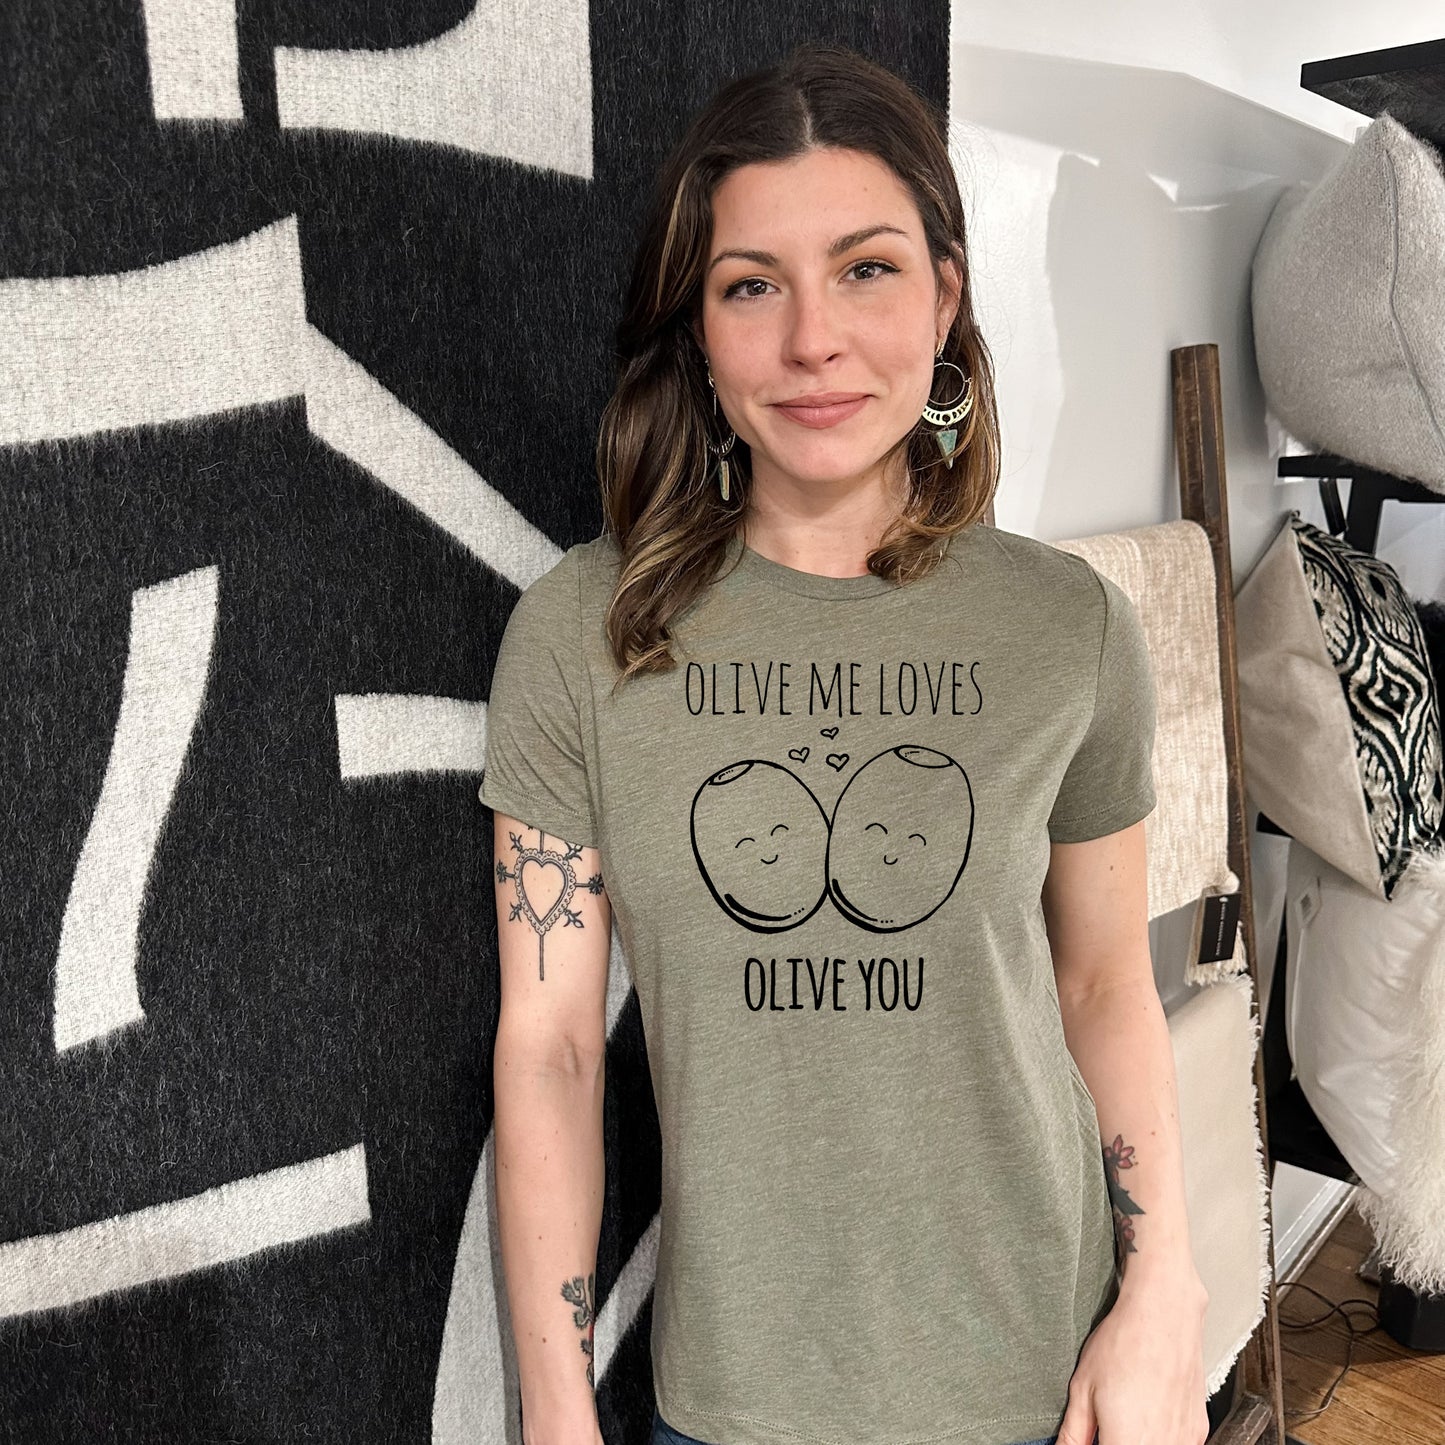 Olive Me Loves Olive You - Women's Crew Tee - Olive or Dusty Blue